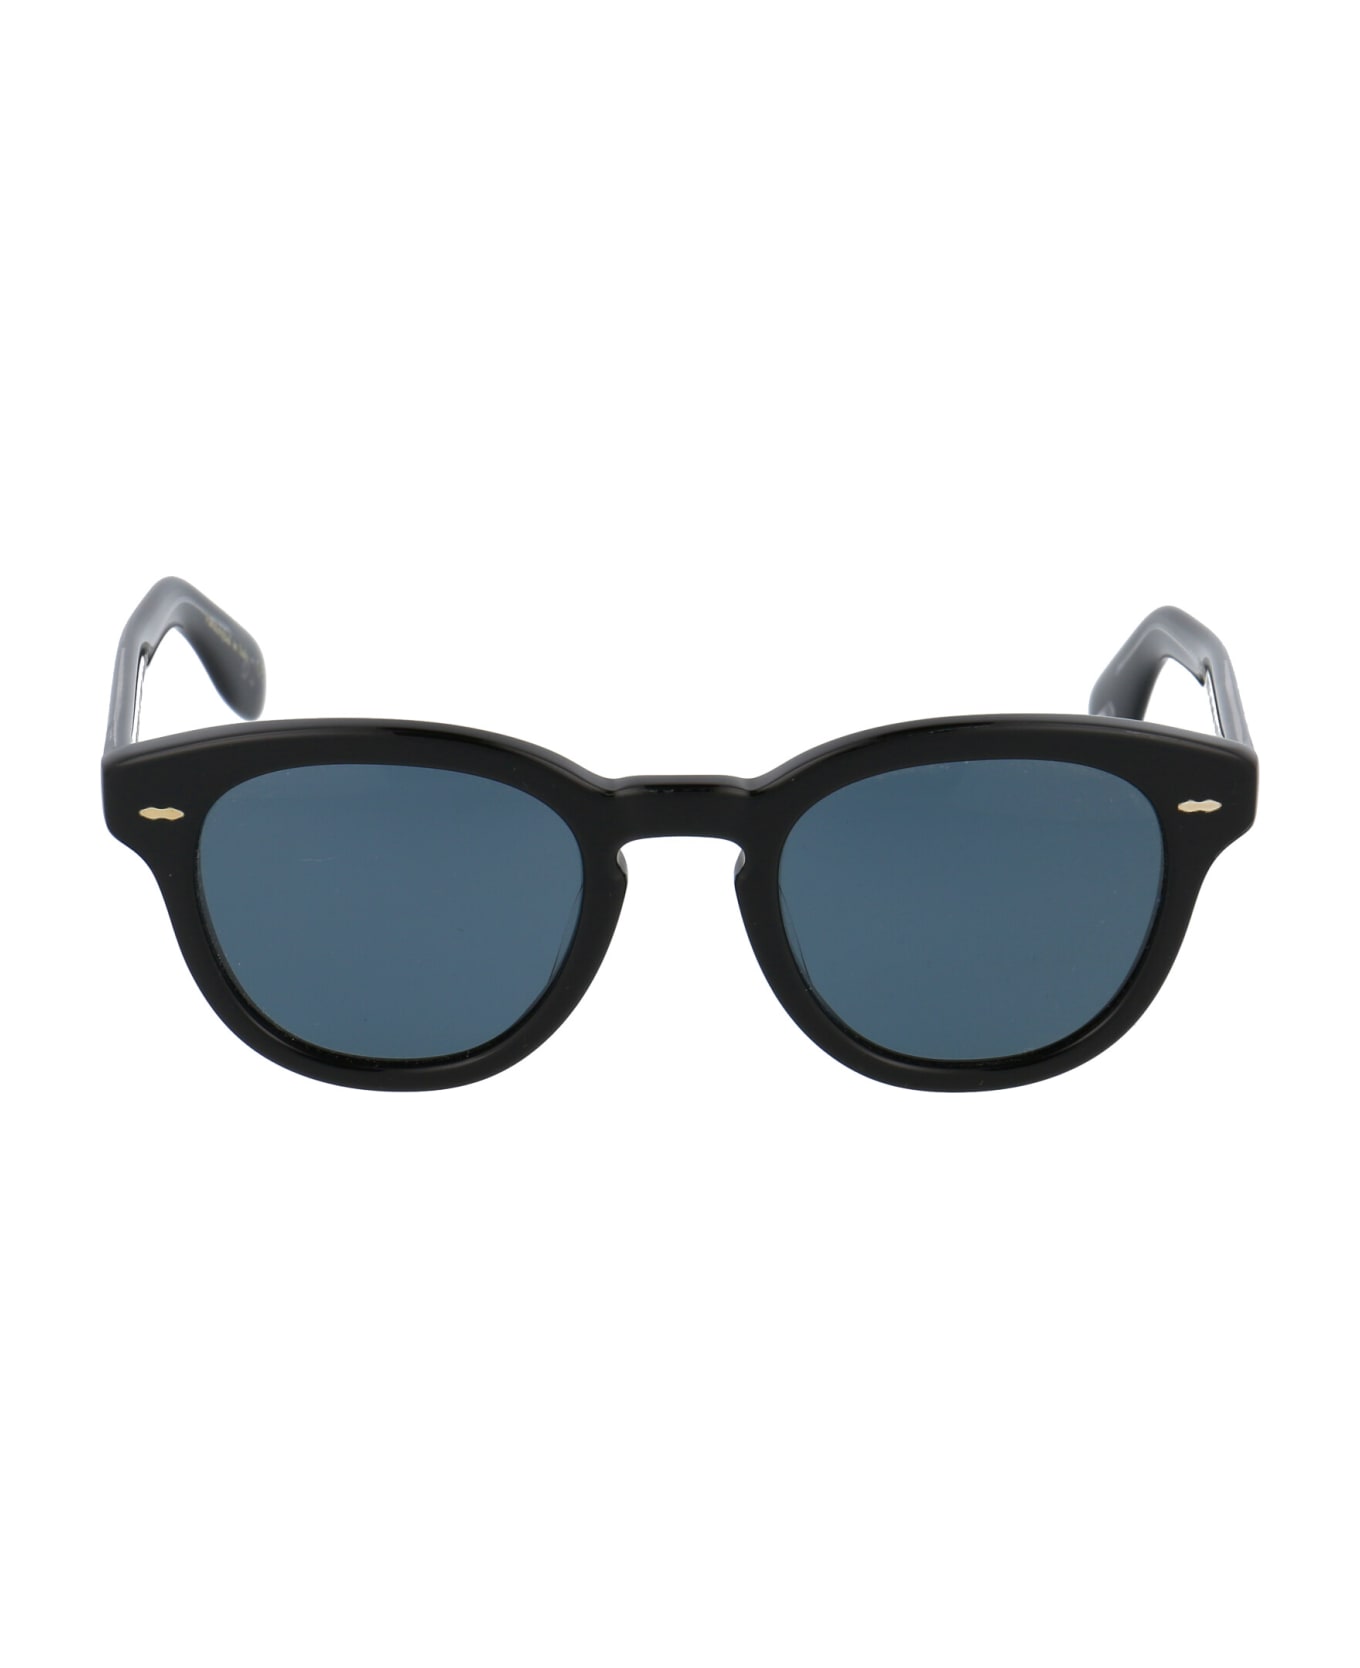 Oliver Peoples Cary Grant Sun Sunglasses - 14923R BLACK